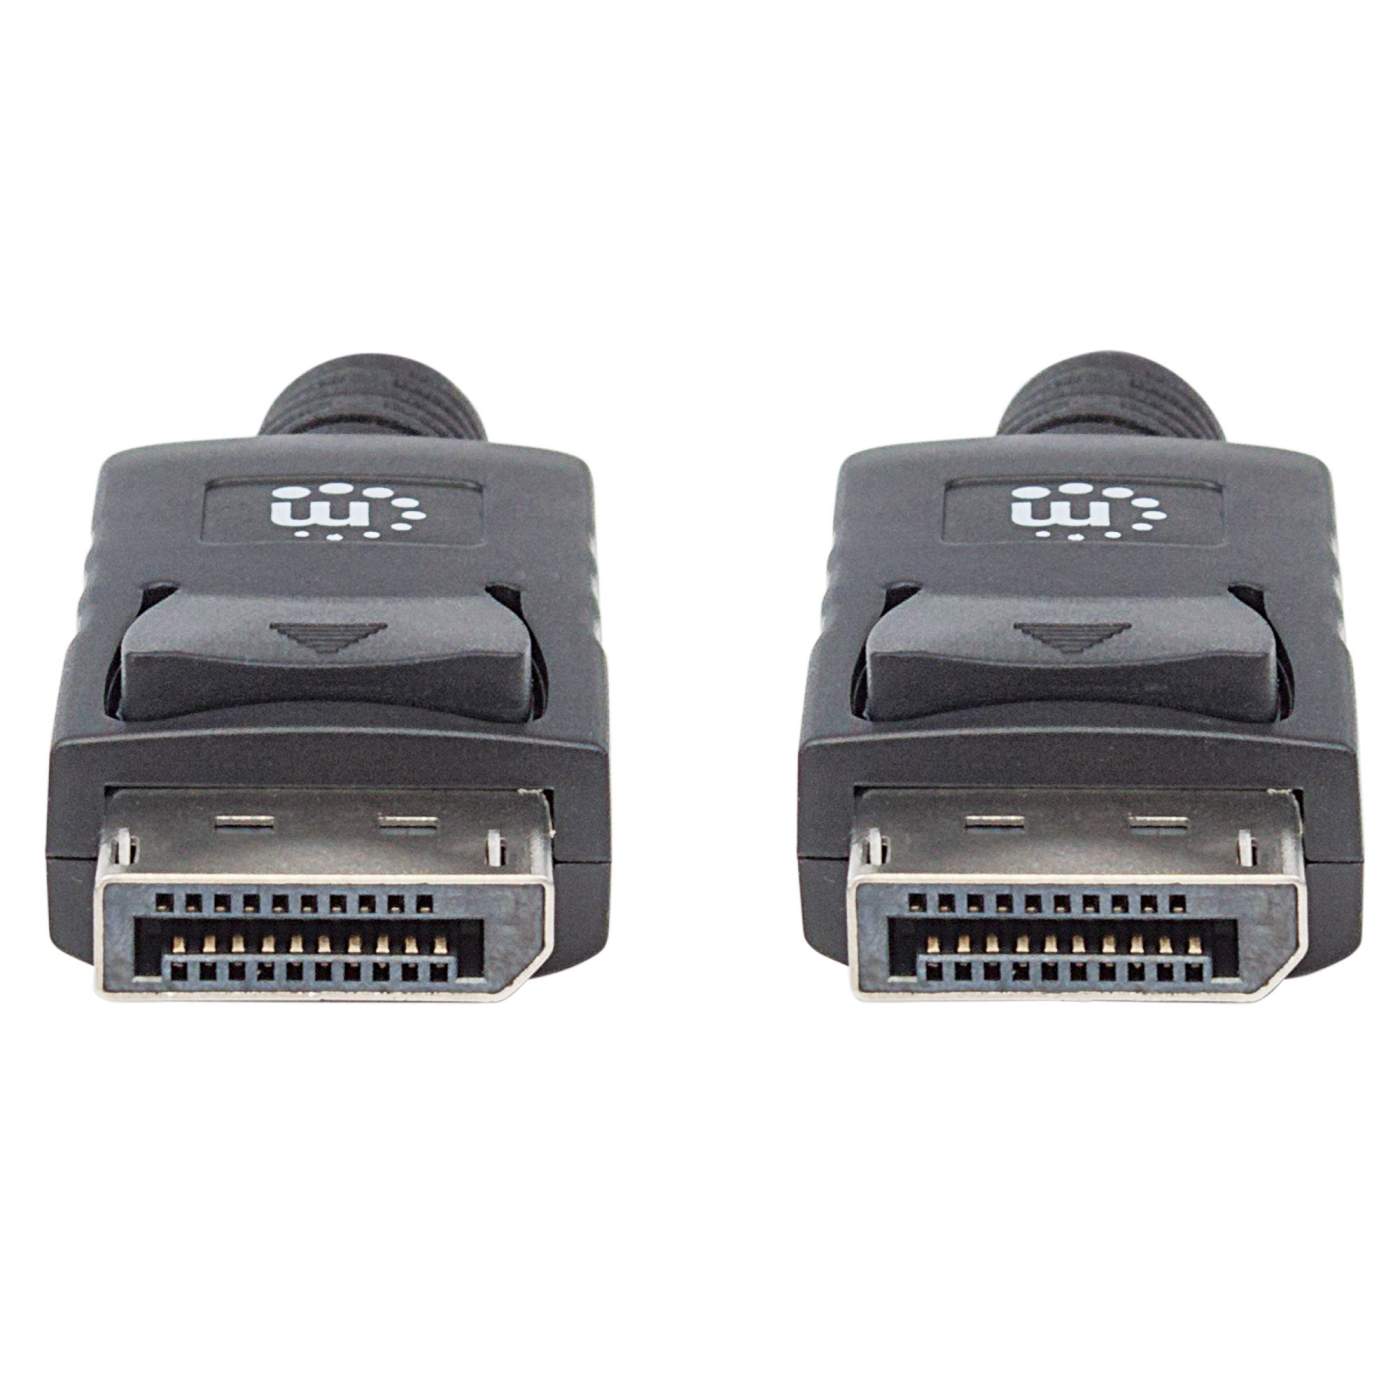 Monitor DisplayPort to VGA cable 3 m - DisplayPort Cables - Multimedia  Cables - Cables and Sockets